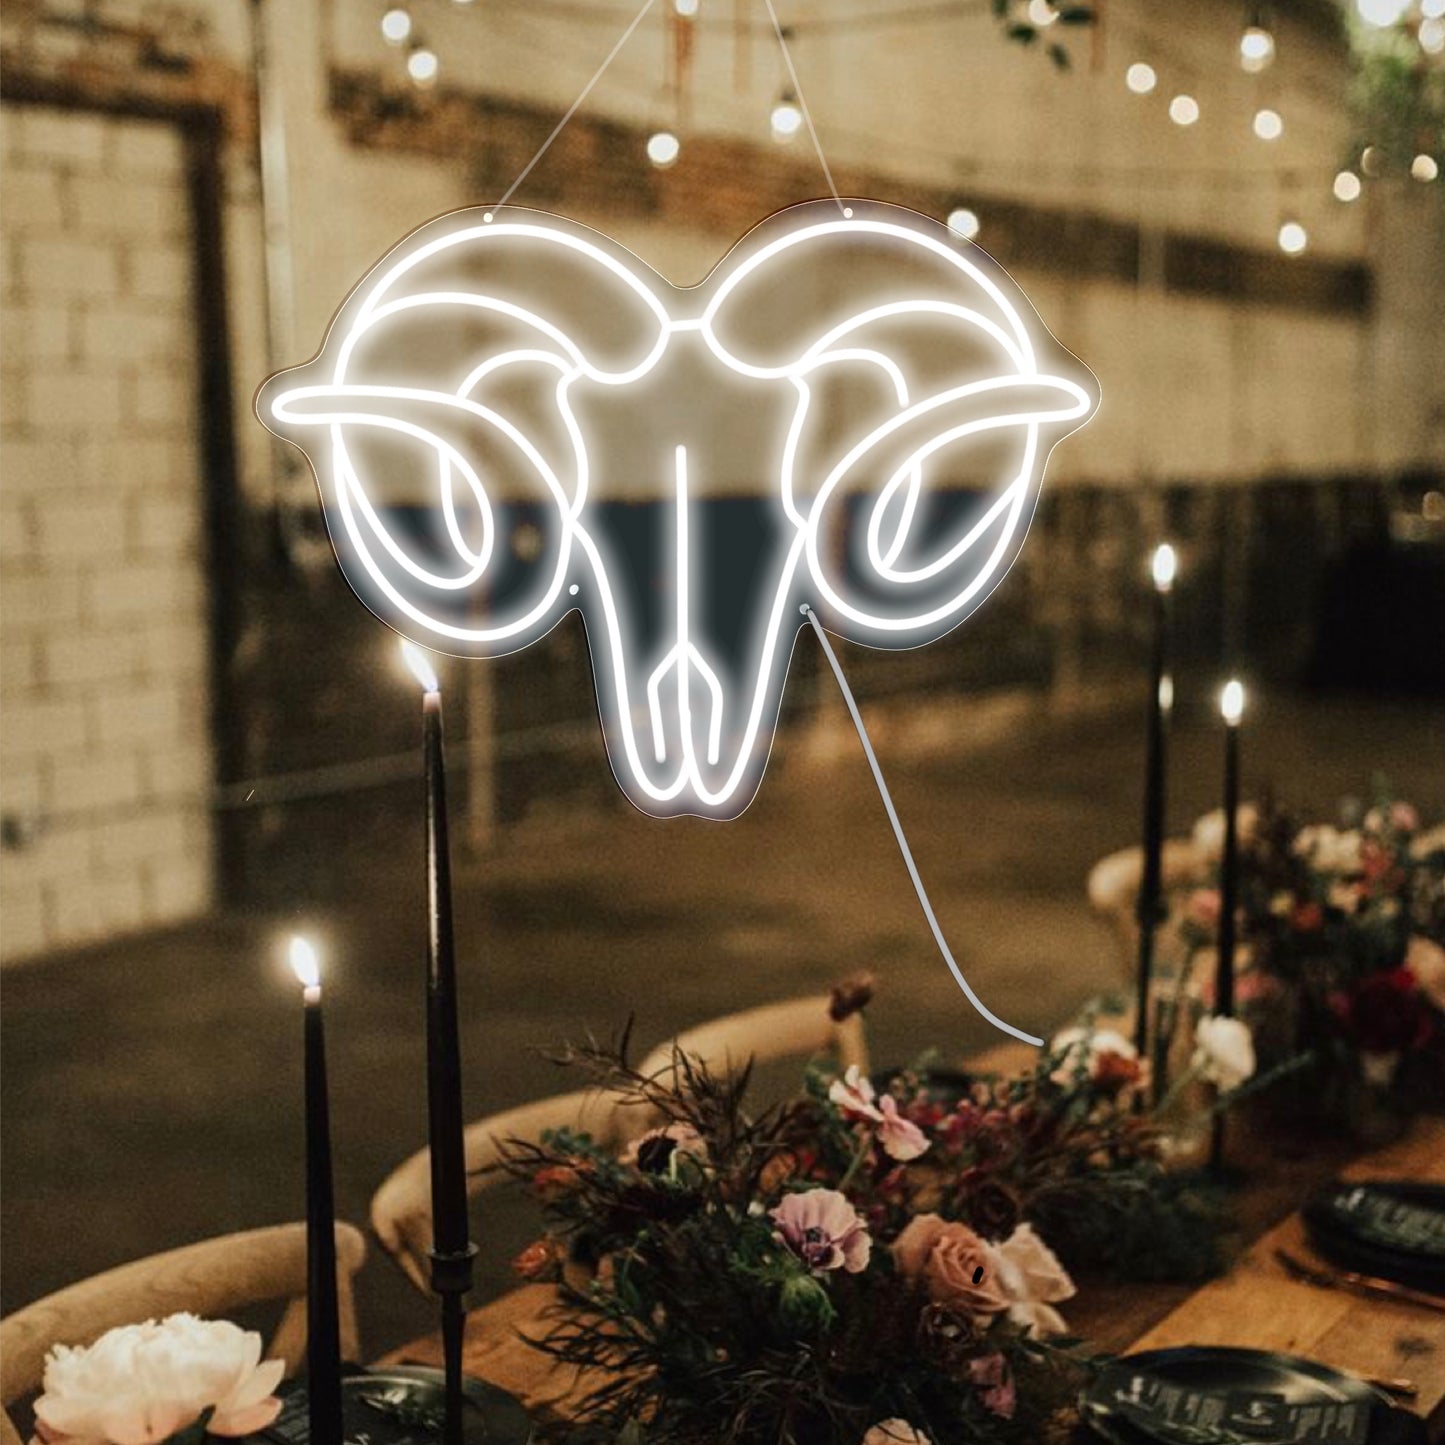  A distinctive Ramskull Neon Sign, ideal for Western Gothic weddings and vintage Americana themes